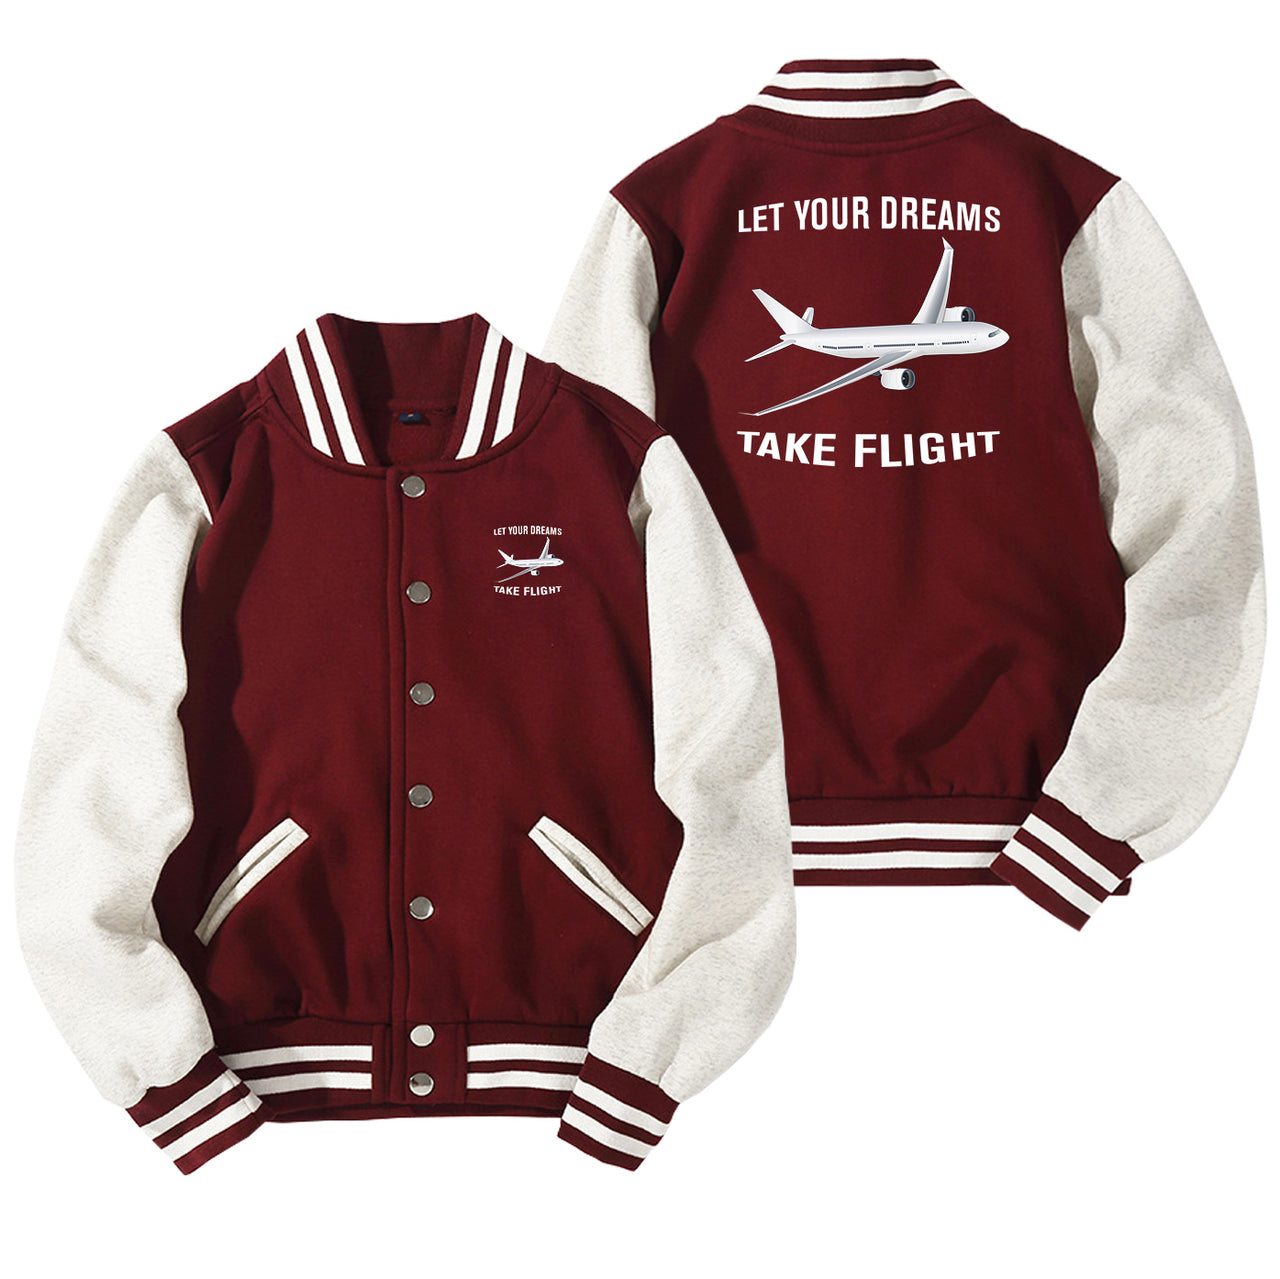 Let Your Dreams Take Flight Designed Baseball Style Jackets